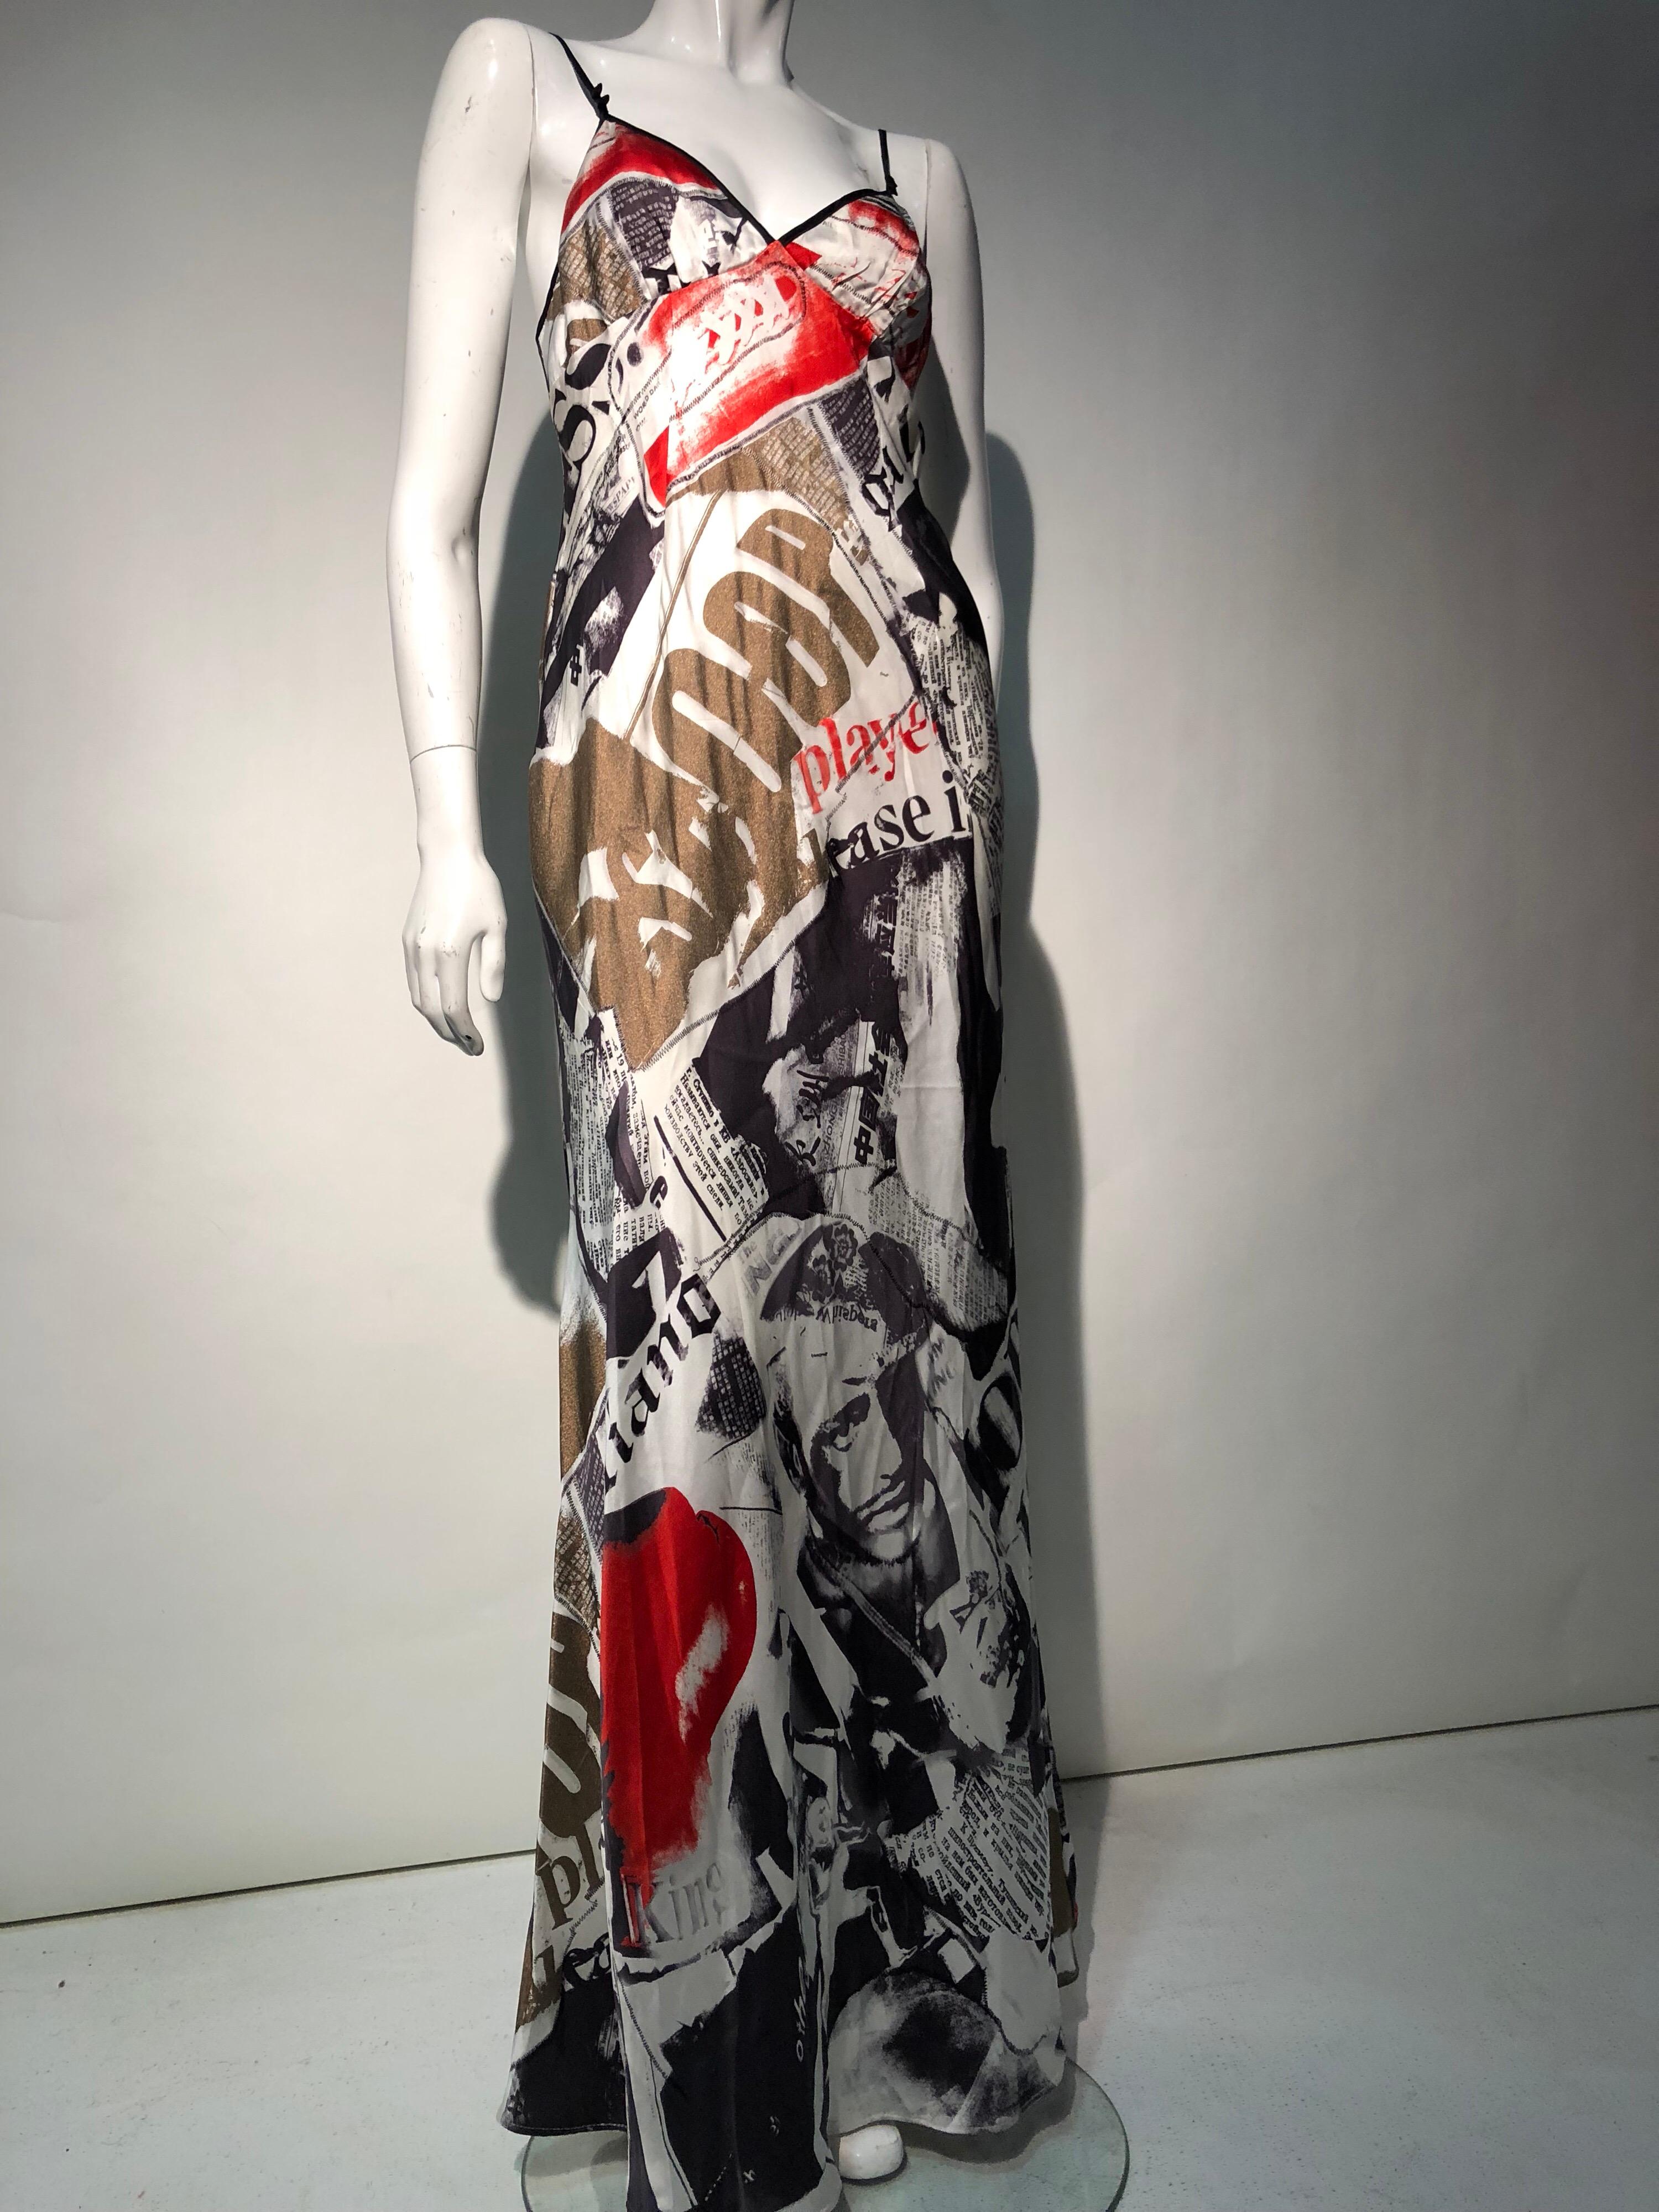 A fabulous, never-worn John Galliano bias-cut silk slip gown dress in his trademark newsprint pattern. From the early 2000s. Tones of black, white, red and bronze play up the bold graphic pattern.